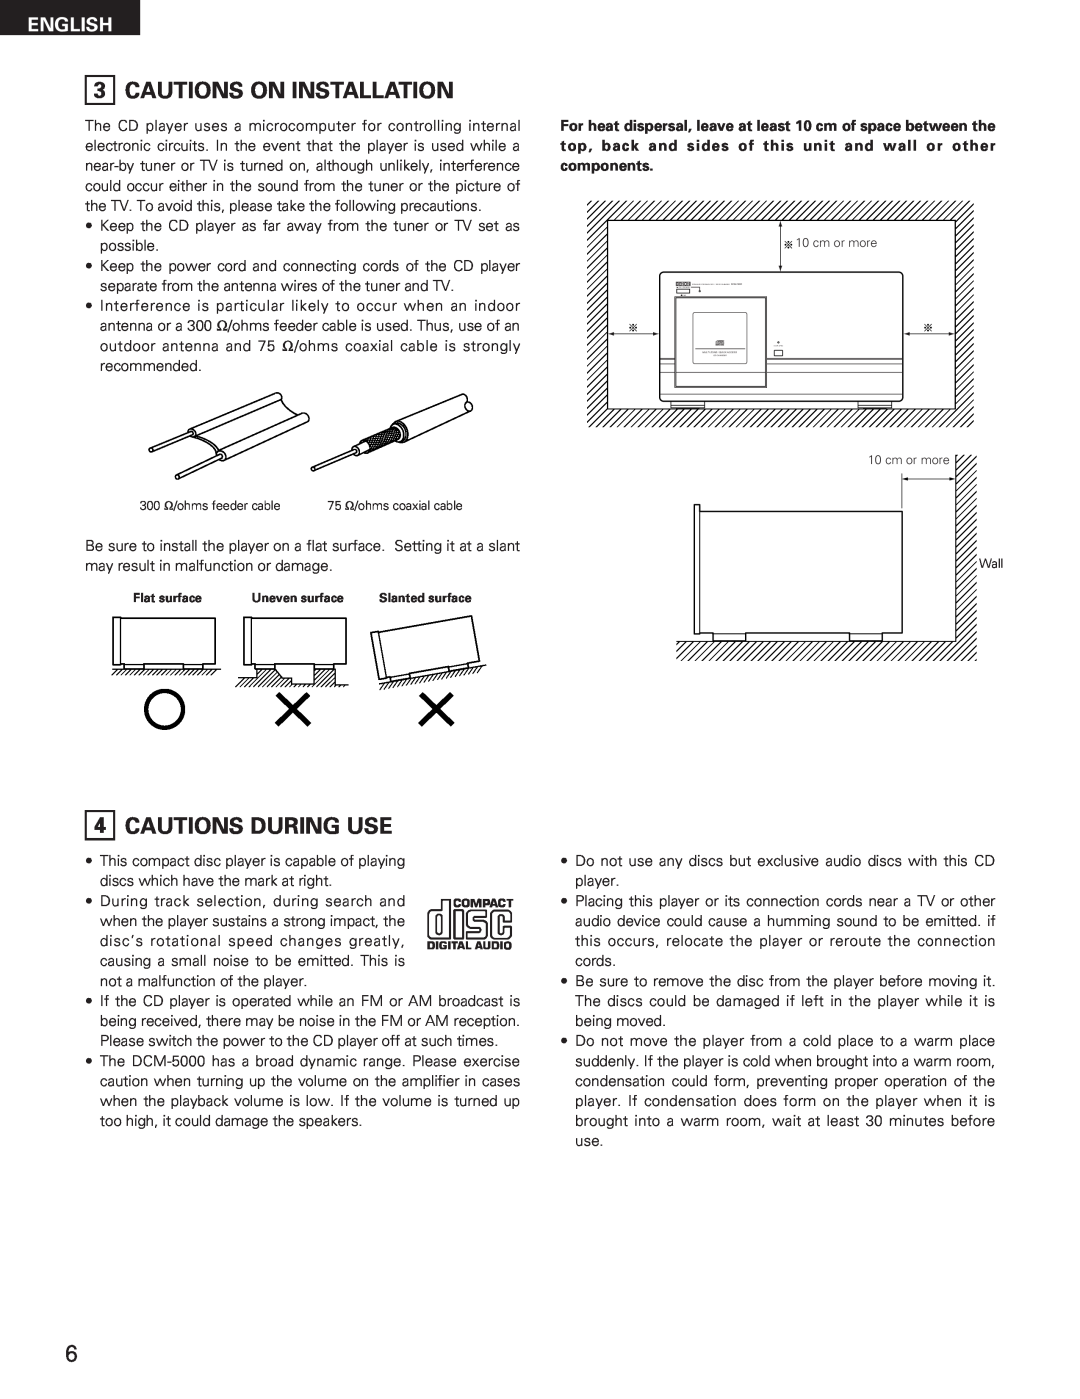 Denon DCM-5001 manual Cautions On Installation, Cautions During Use, English 